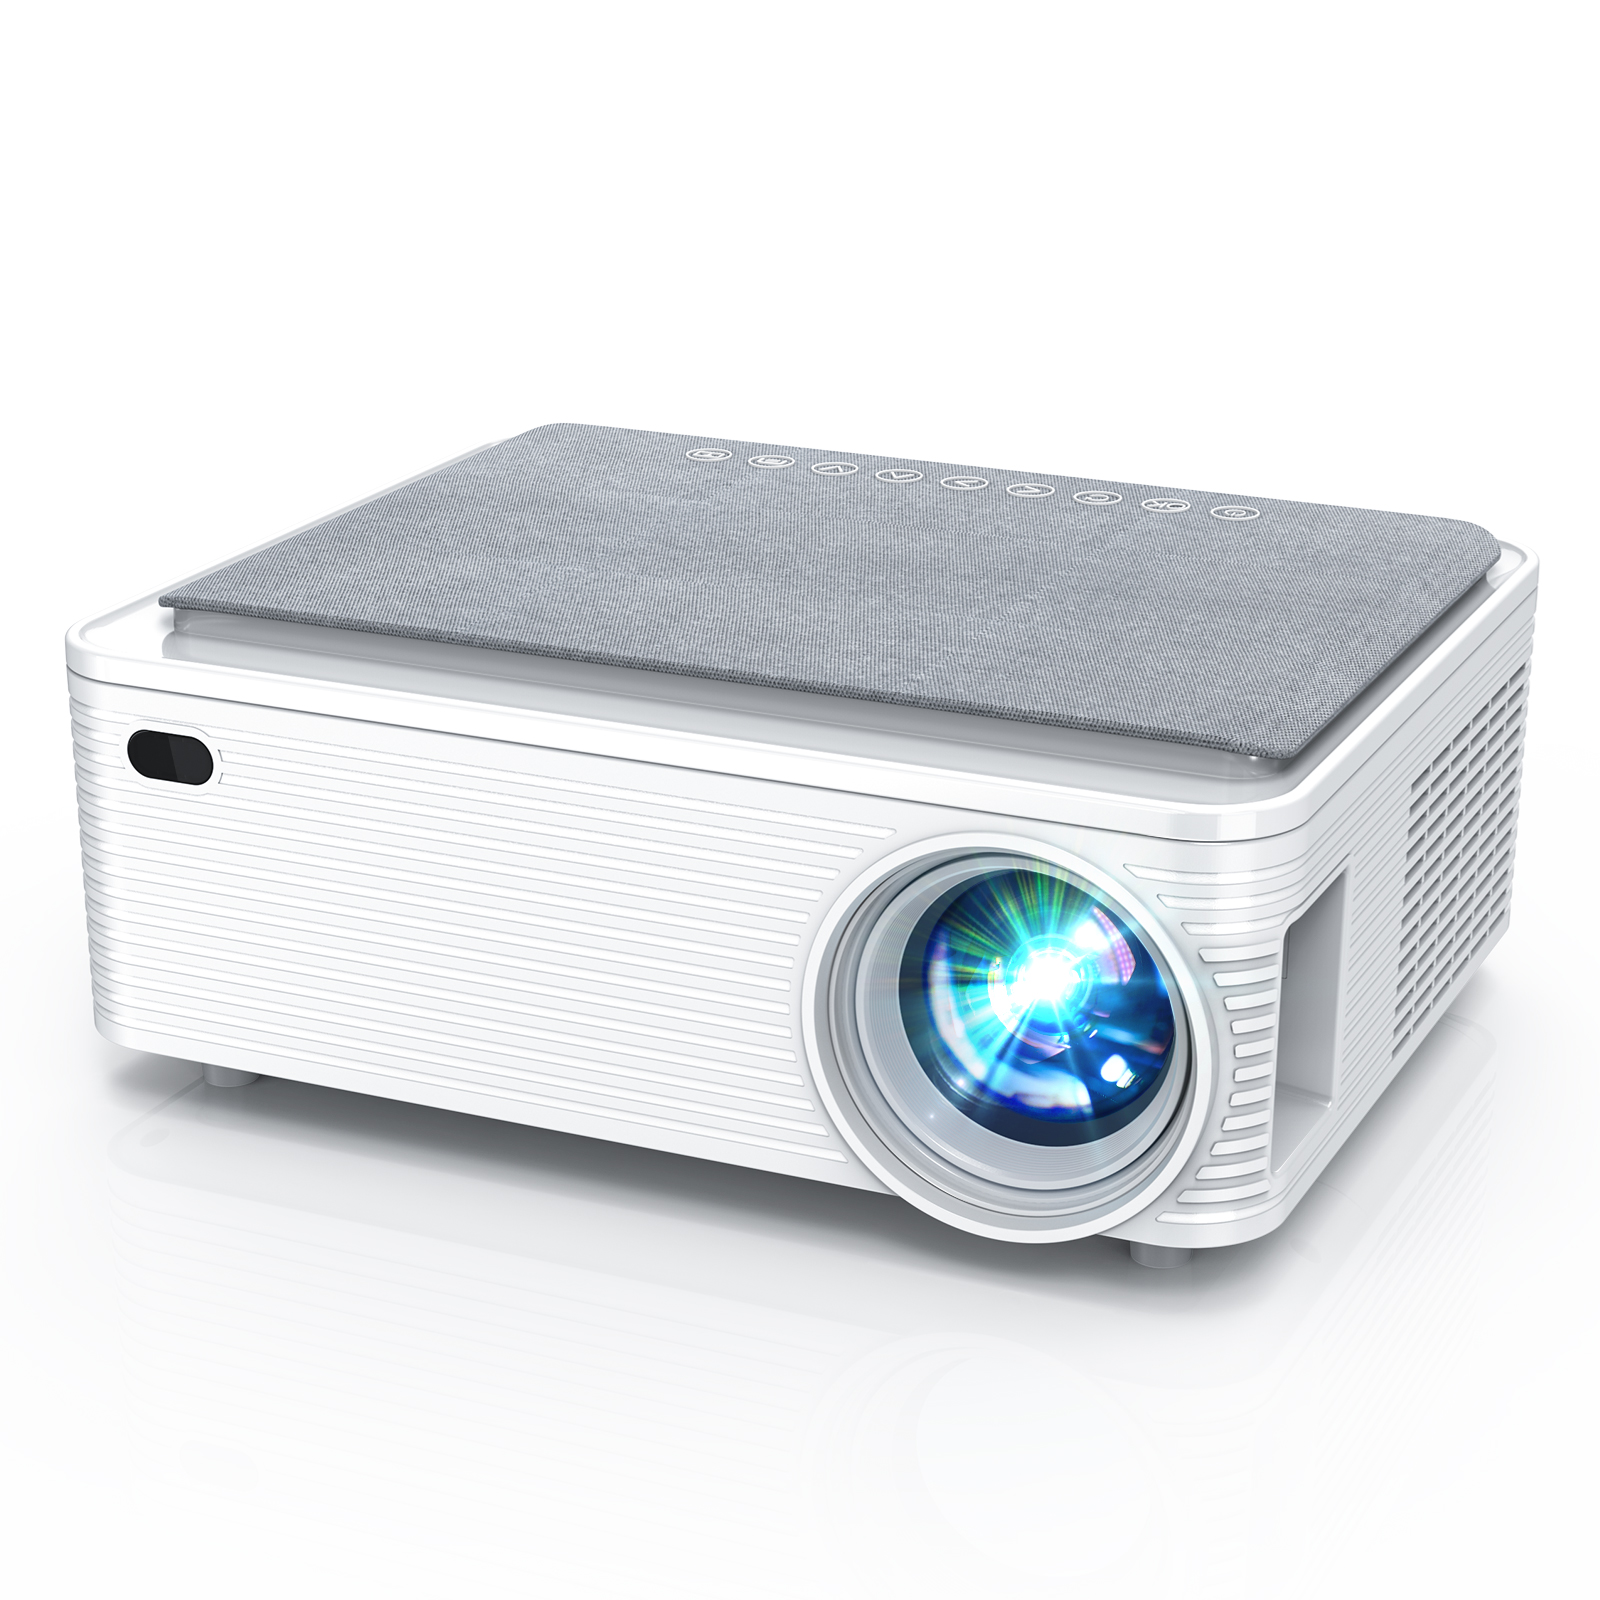 WHOLESALE WIFI PROJECTOR: ENHANCED PORTABILITY AND CONNECTIVITY